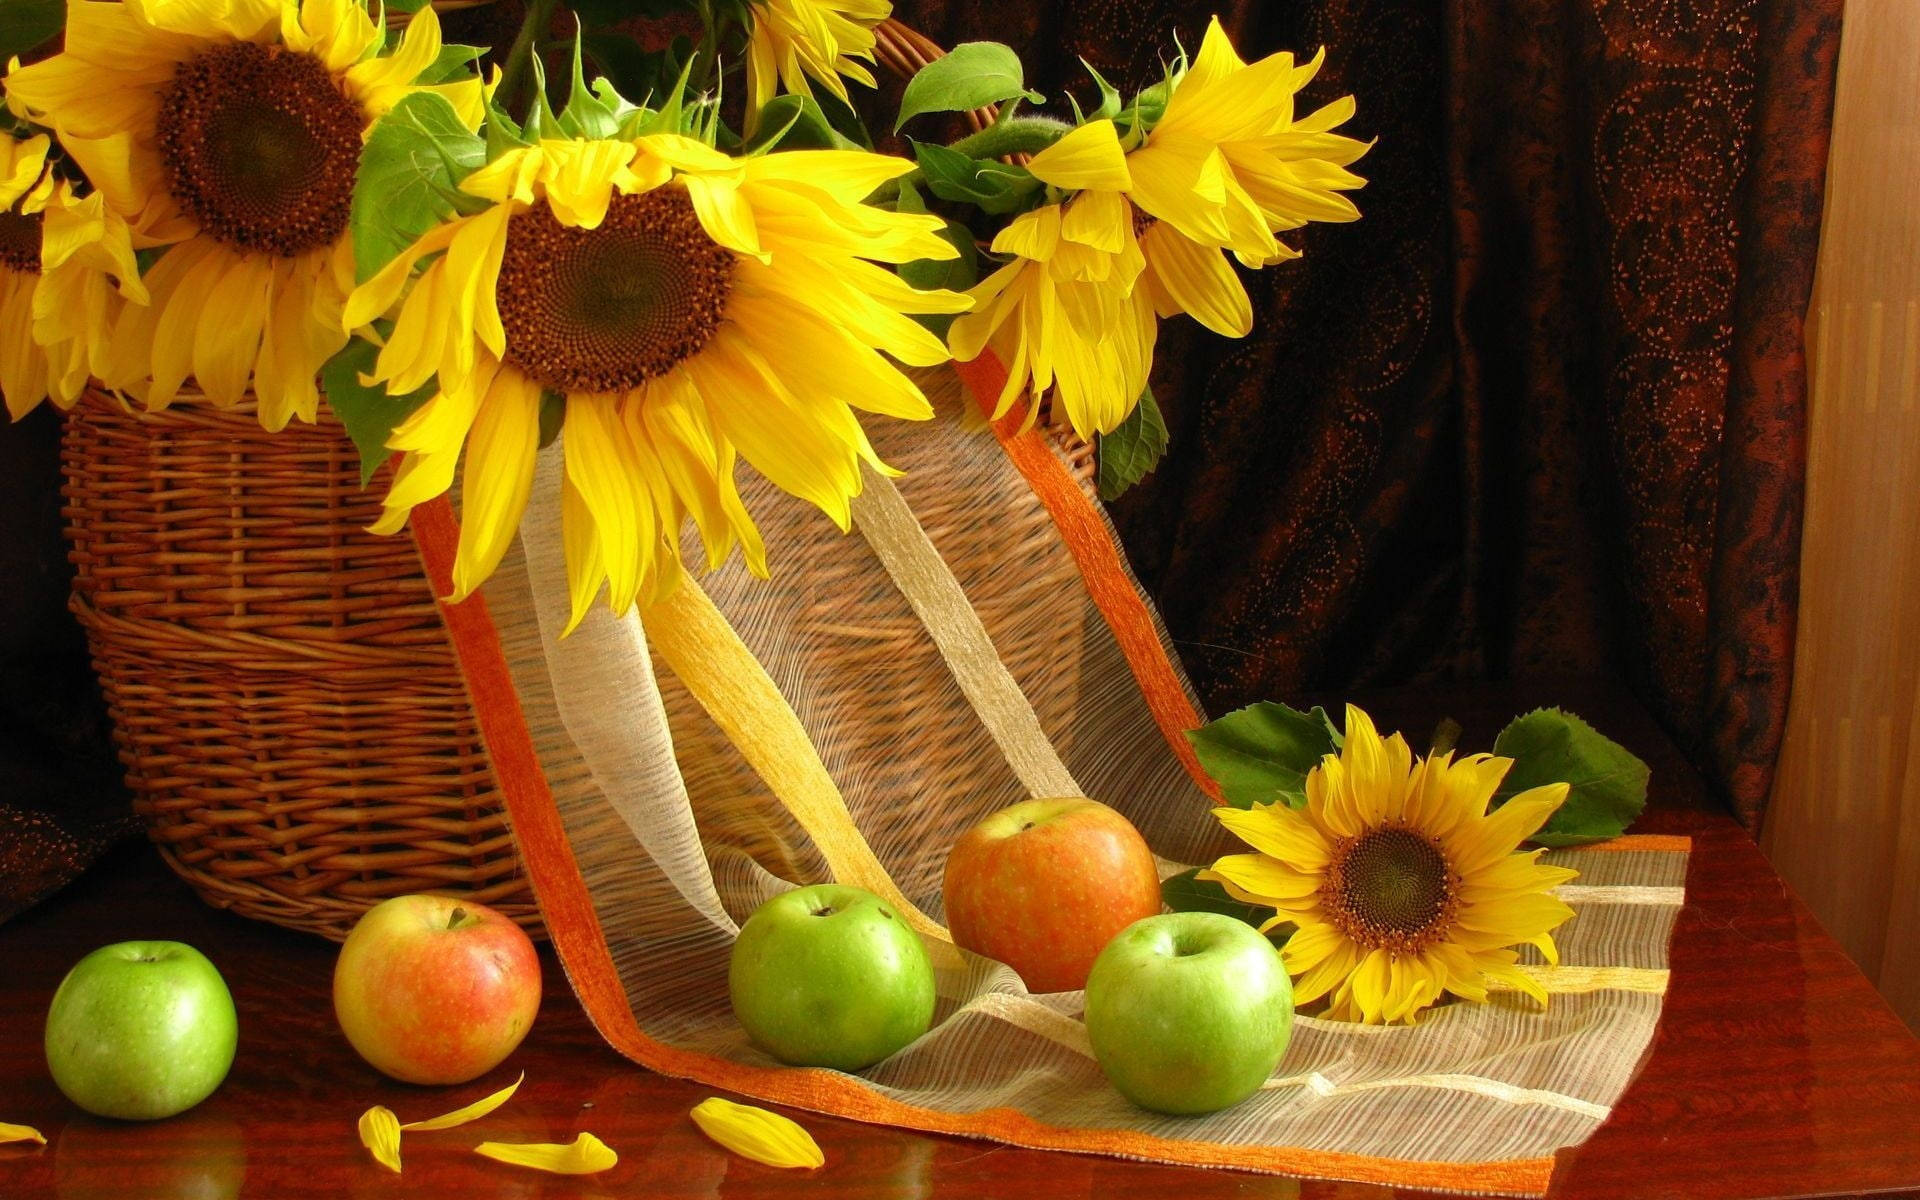 Static Sunflowers And Apples Background